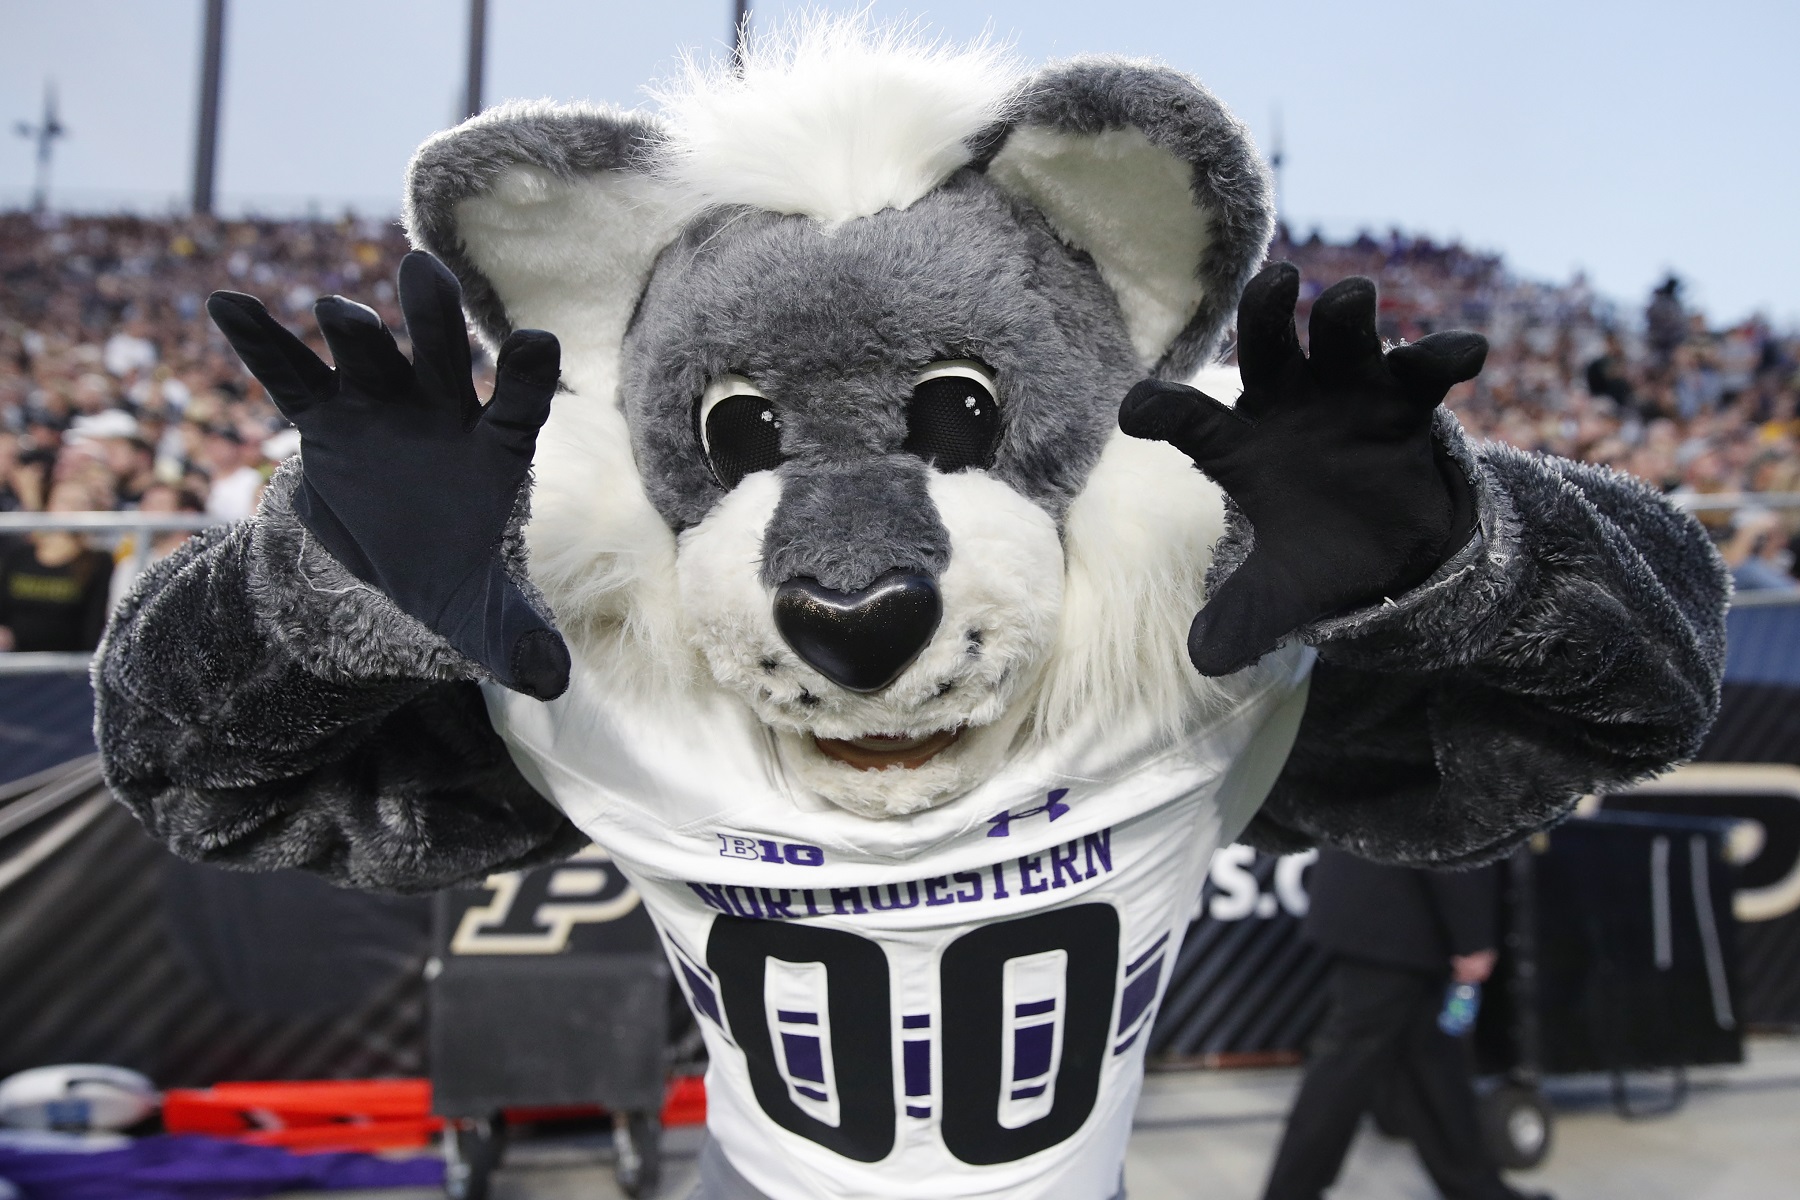 Darren Rovell has a $238,000 interest in seeing Northwestern beat Ohio State in college football